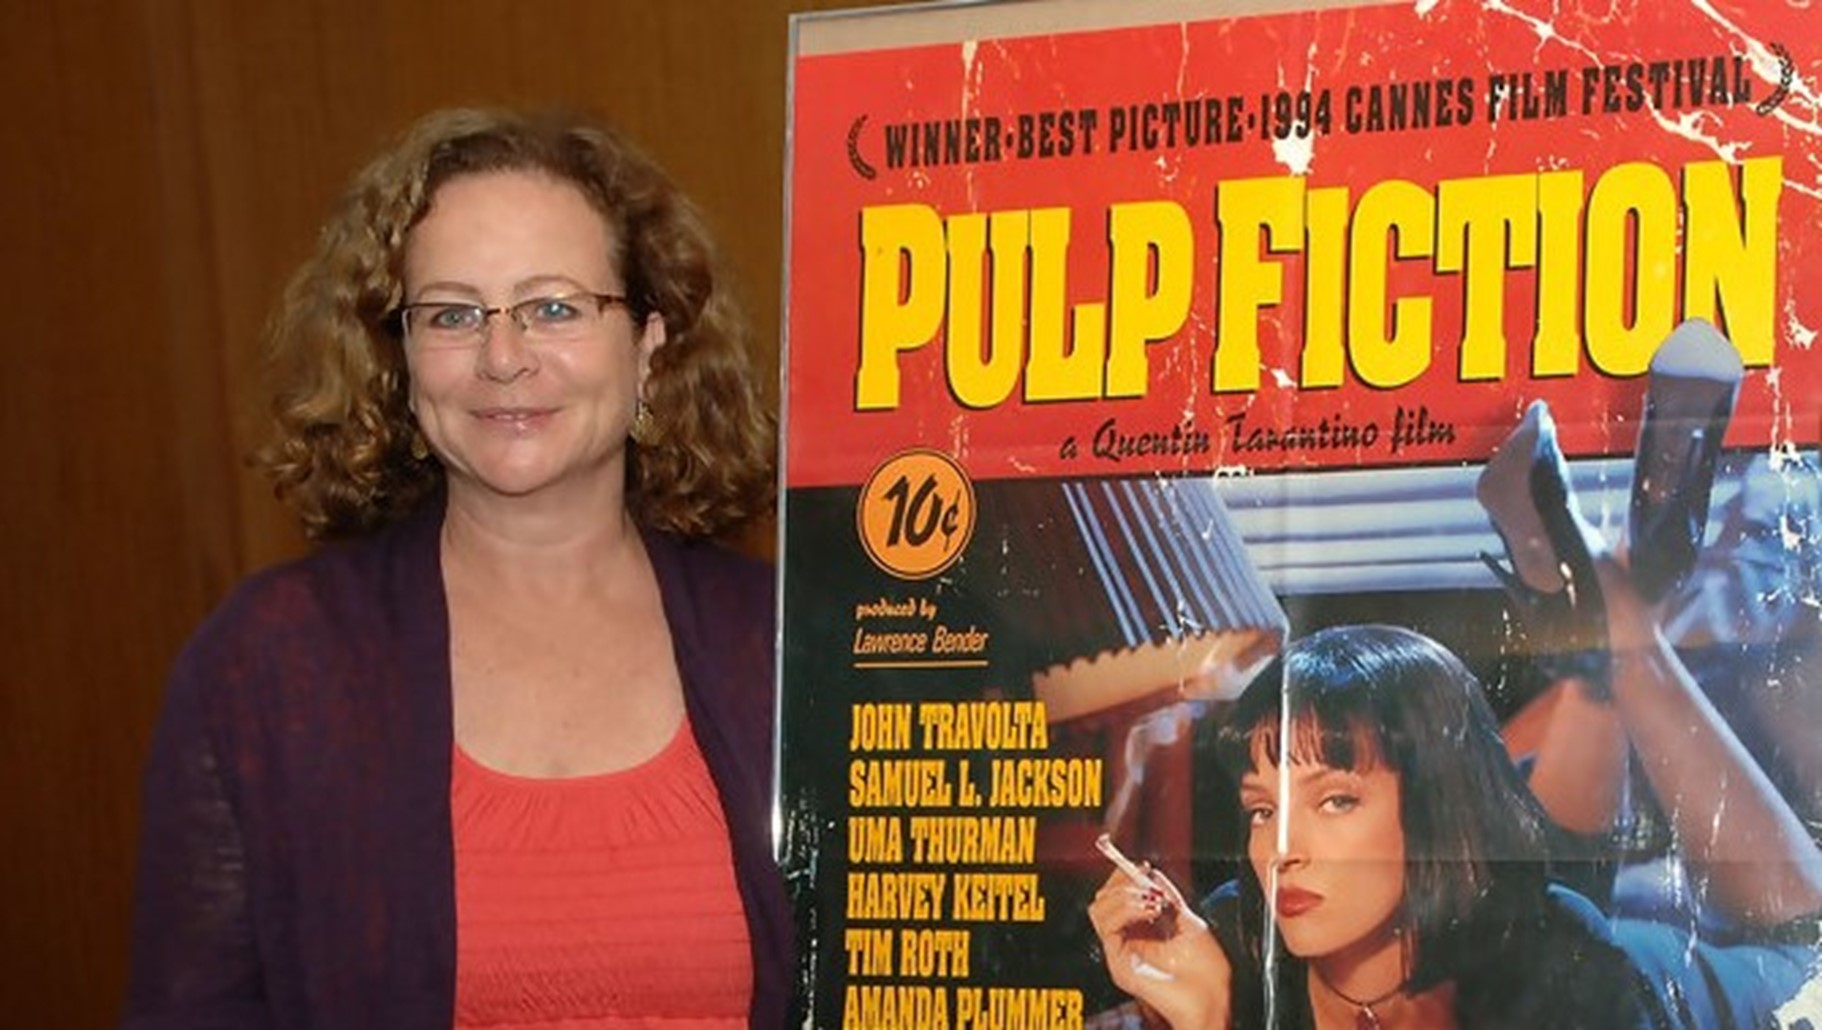 Sally Menke standing beside a Pulp Fiction poster